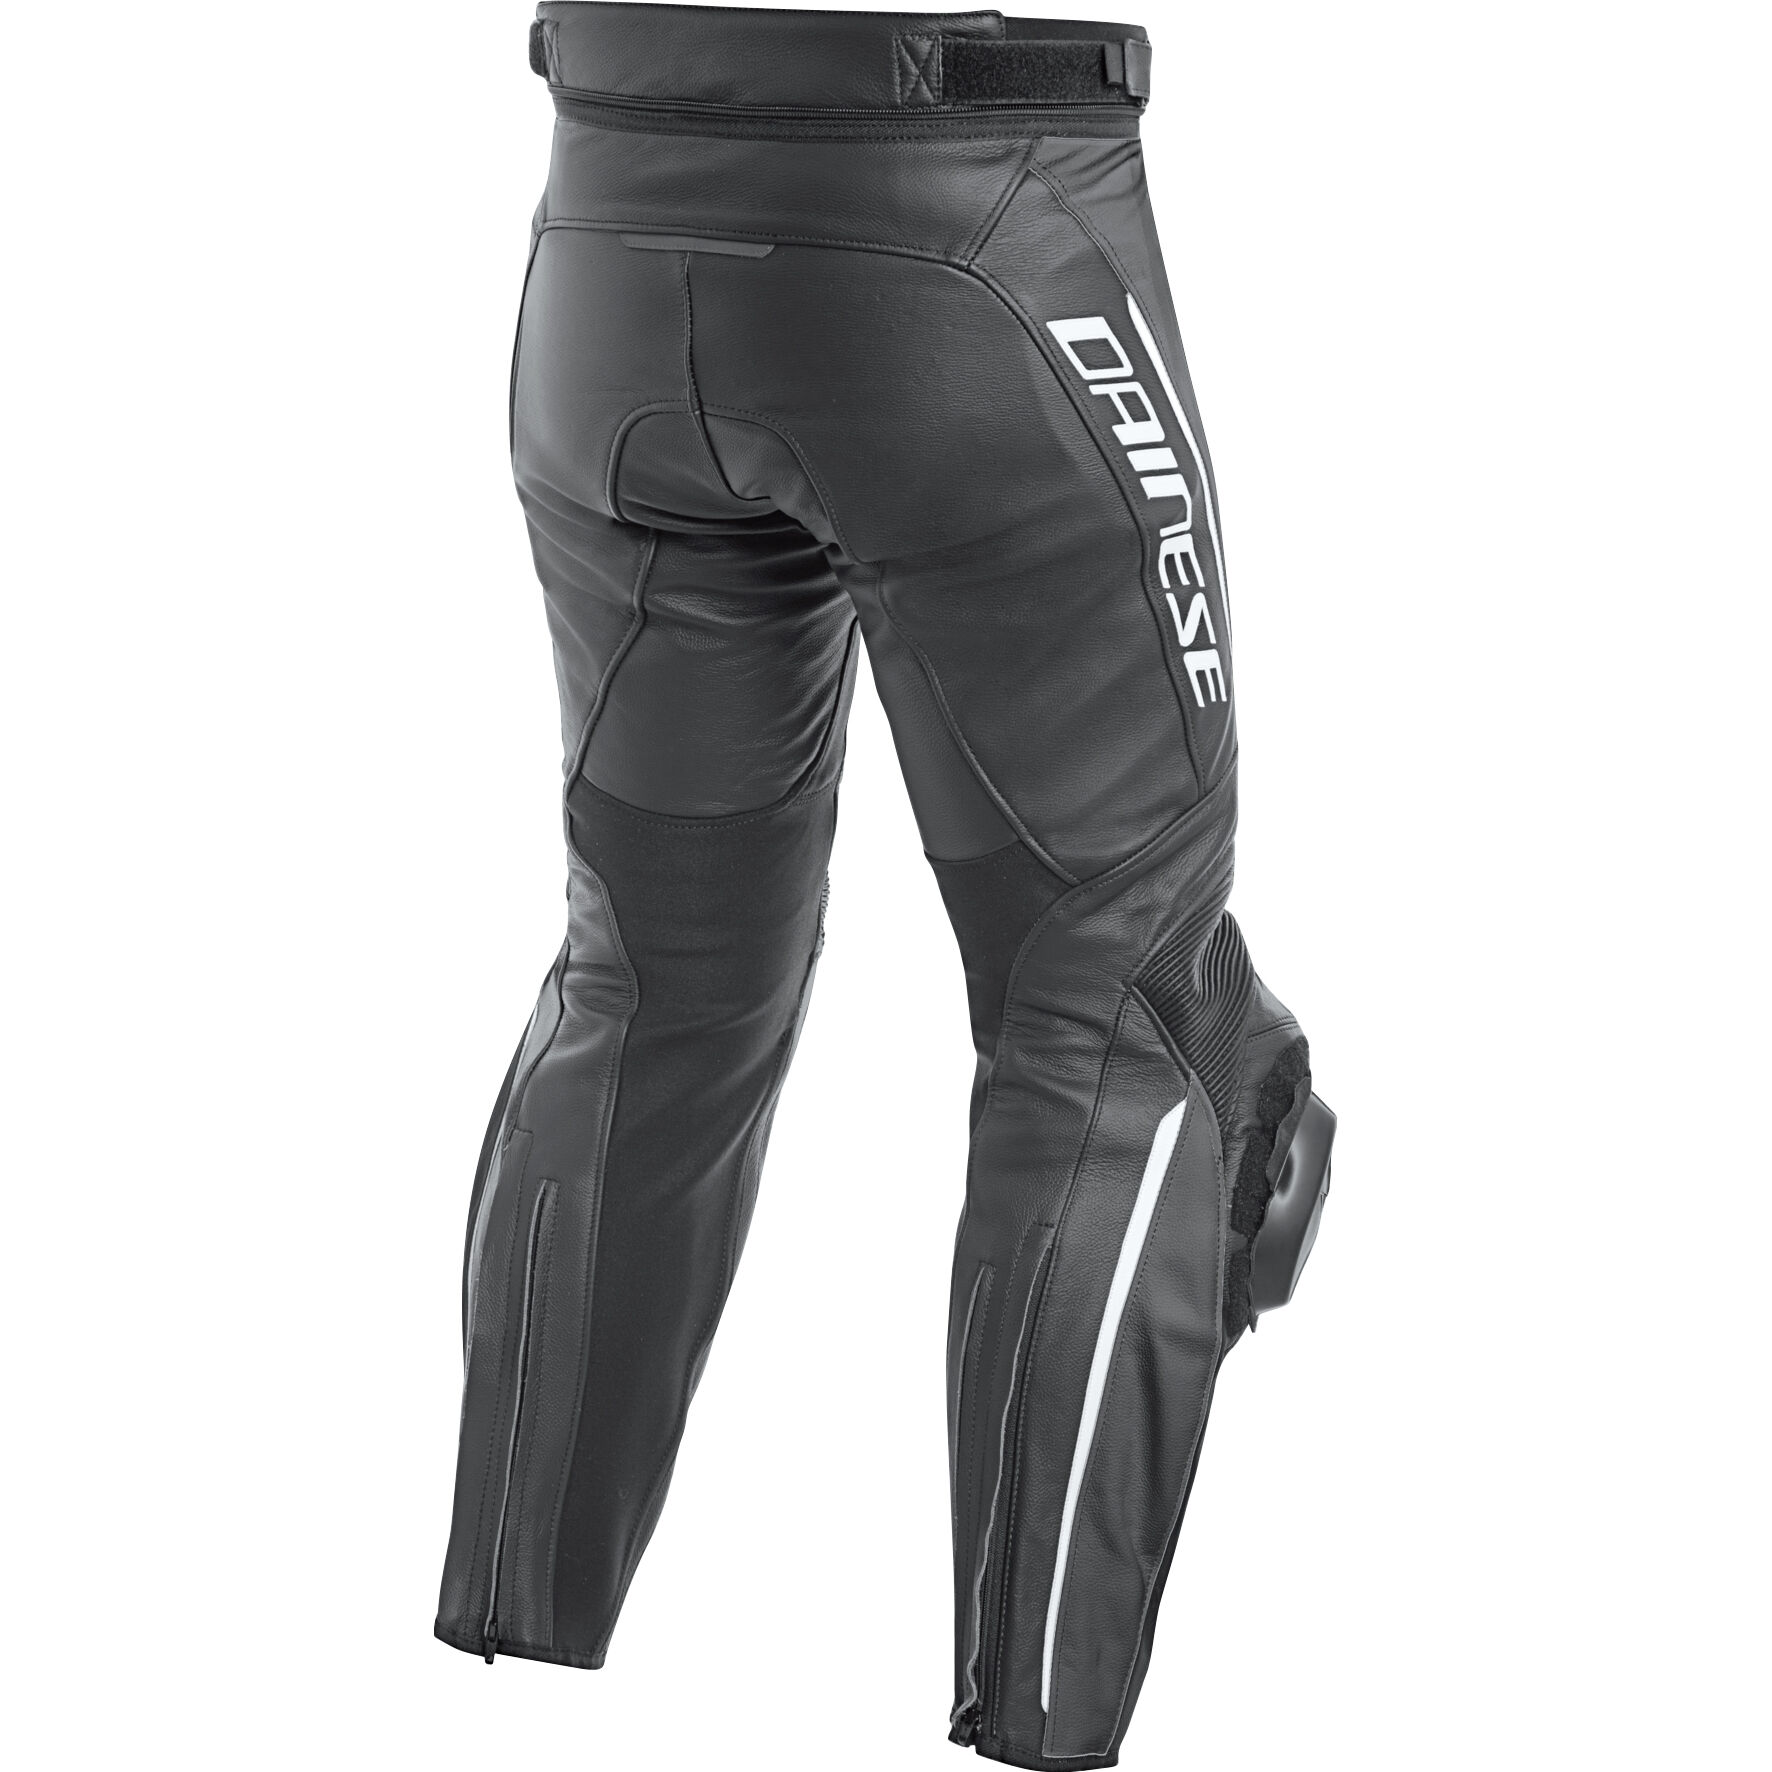 Ducati Dainese Company C3 Leather Trousers Leather Pants Black New | eBay